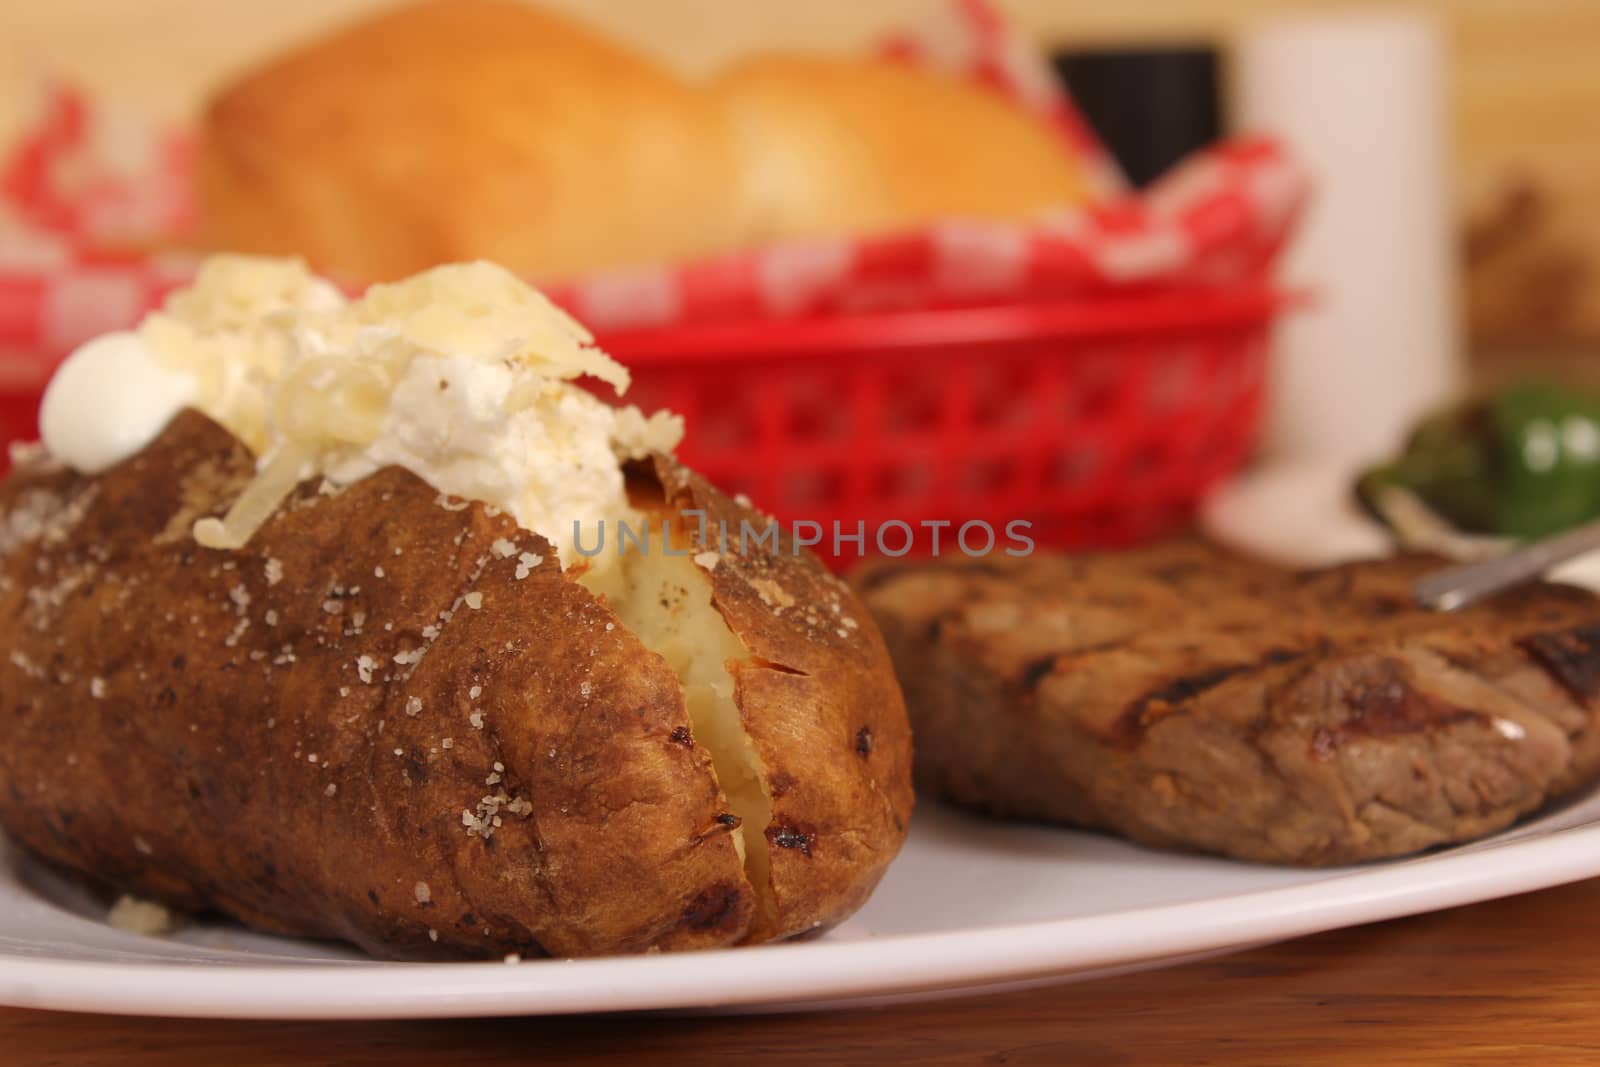 Sirloin Steak With Baked Potato and fresh rolls by Marti157900